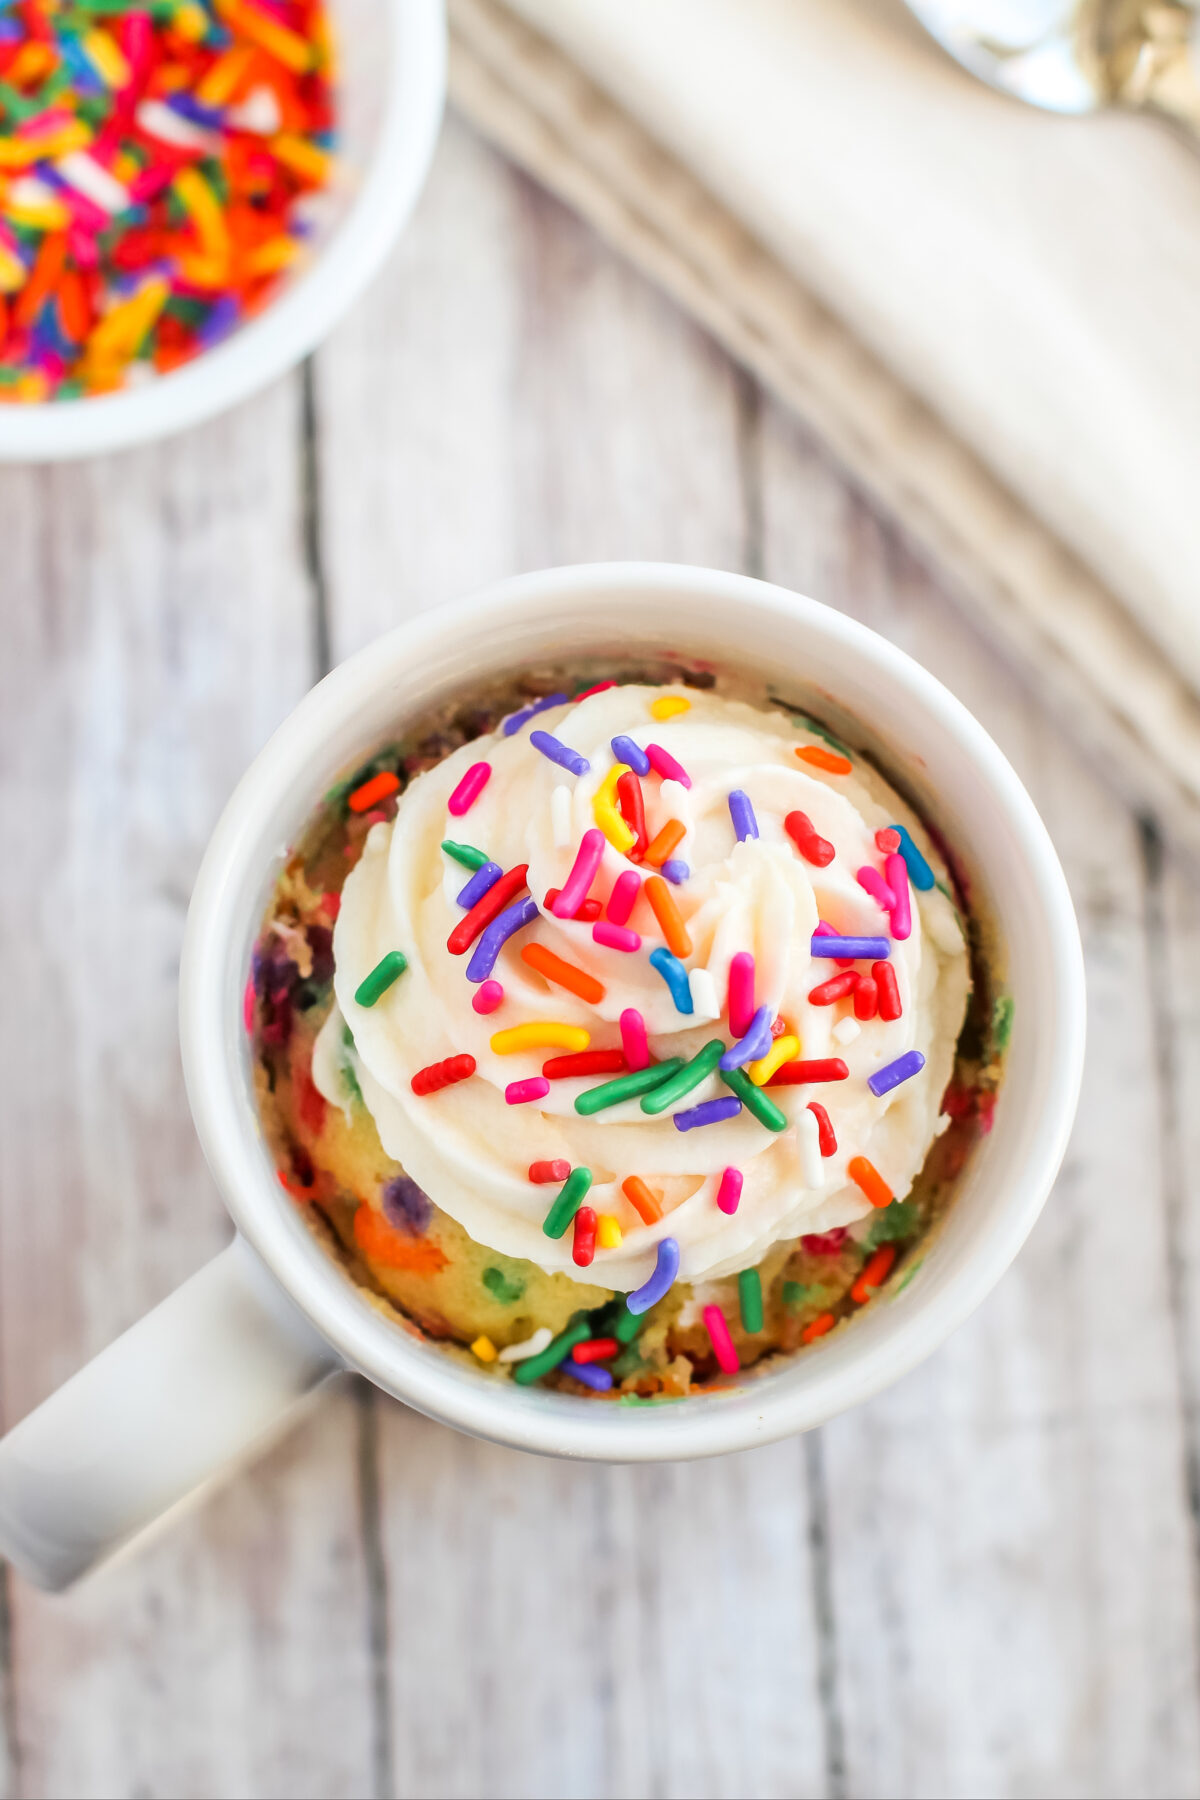 A sweet and simple vanilla funfetti mug cake recipe for the microwave! It's fluffy and moist, and topped with a dollop of buttercream!